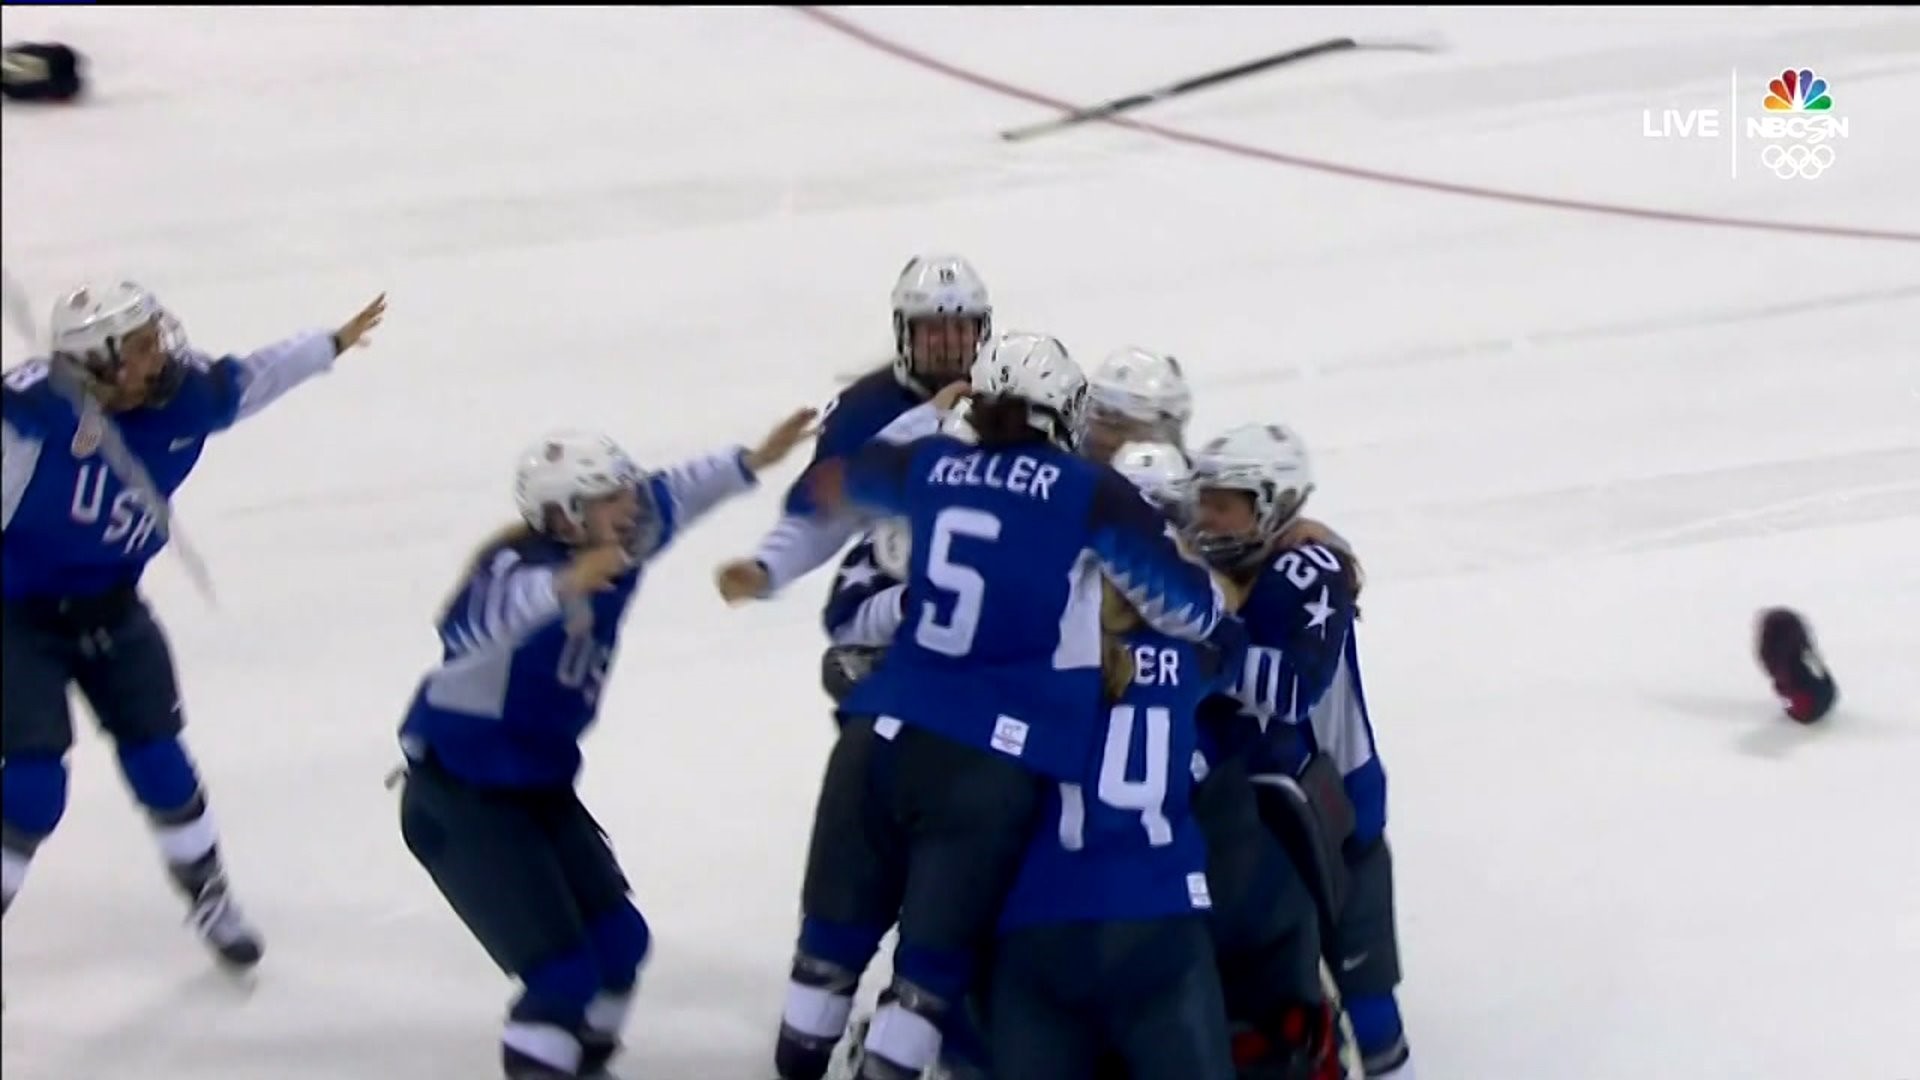 Hockey Fans, Players Pleased as Women's Ice Hockey Strikes Gold